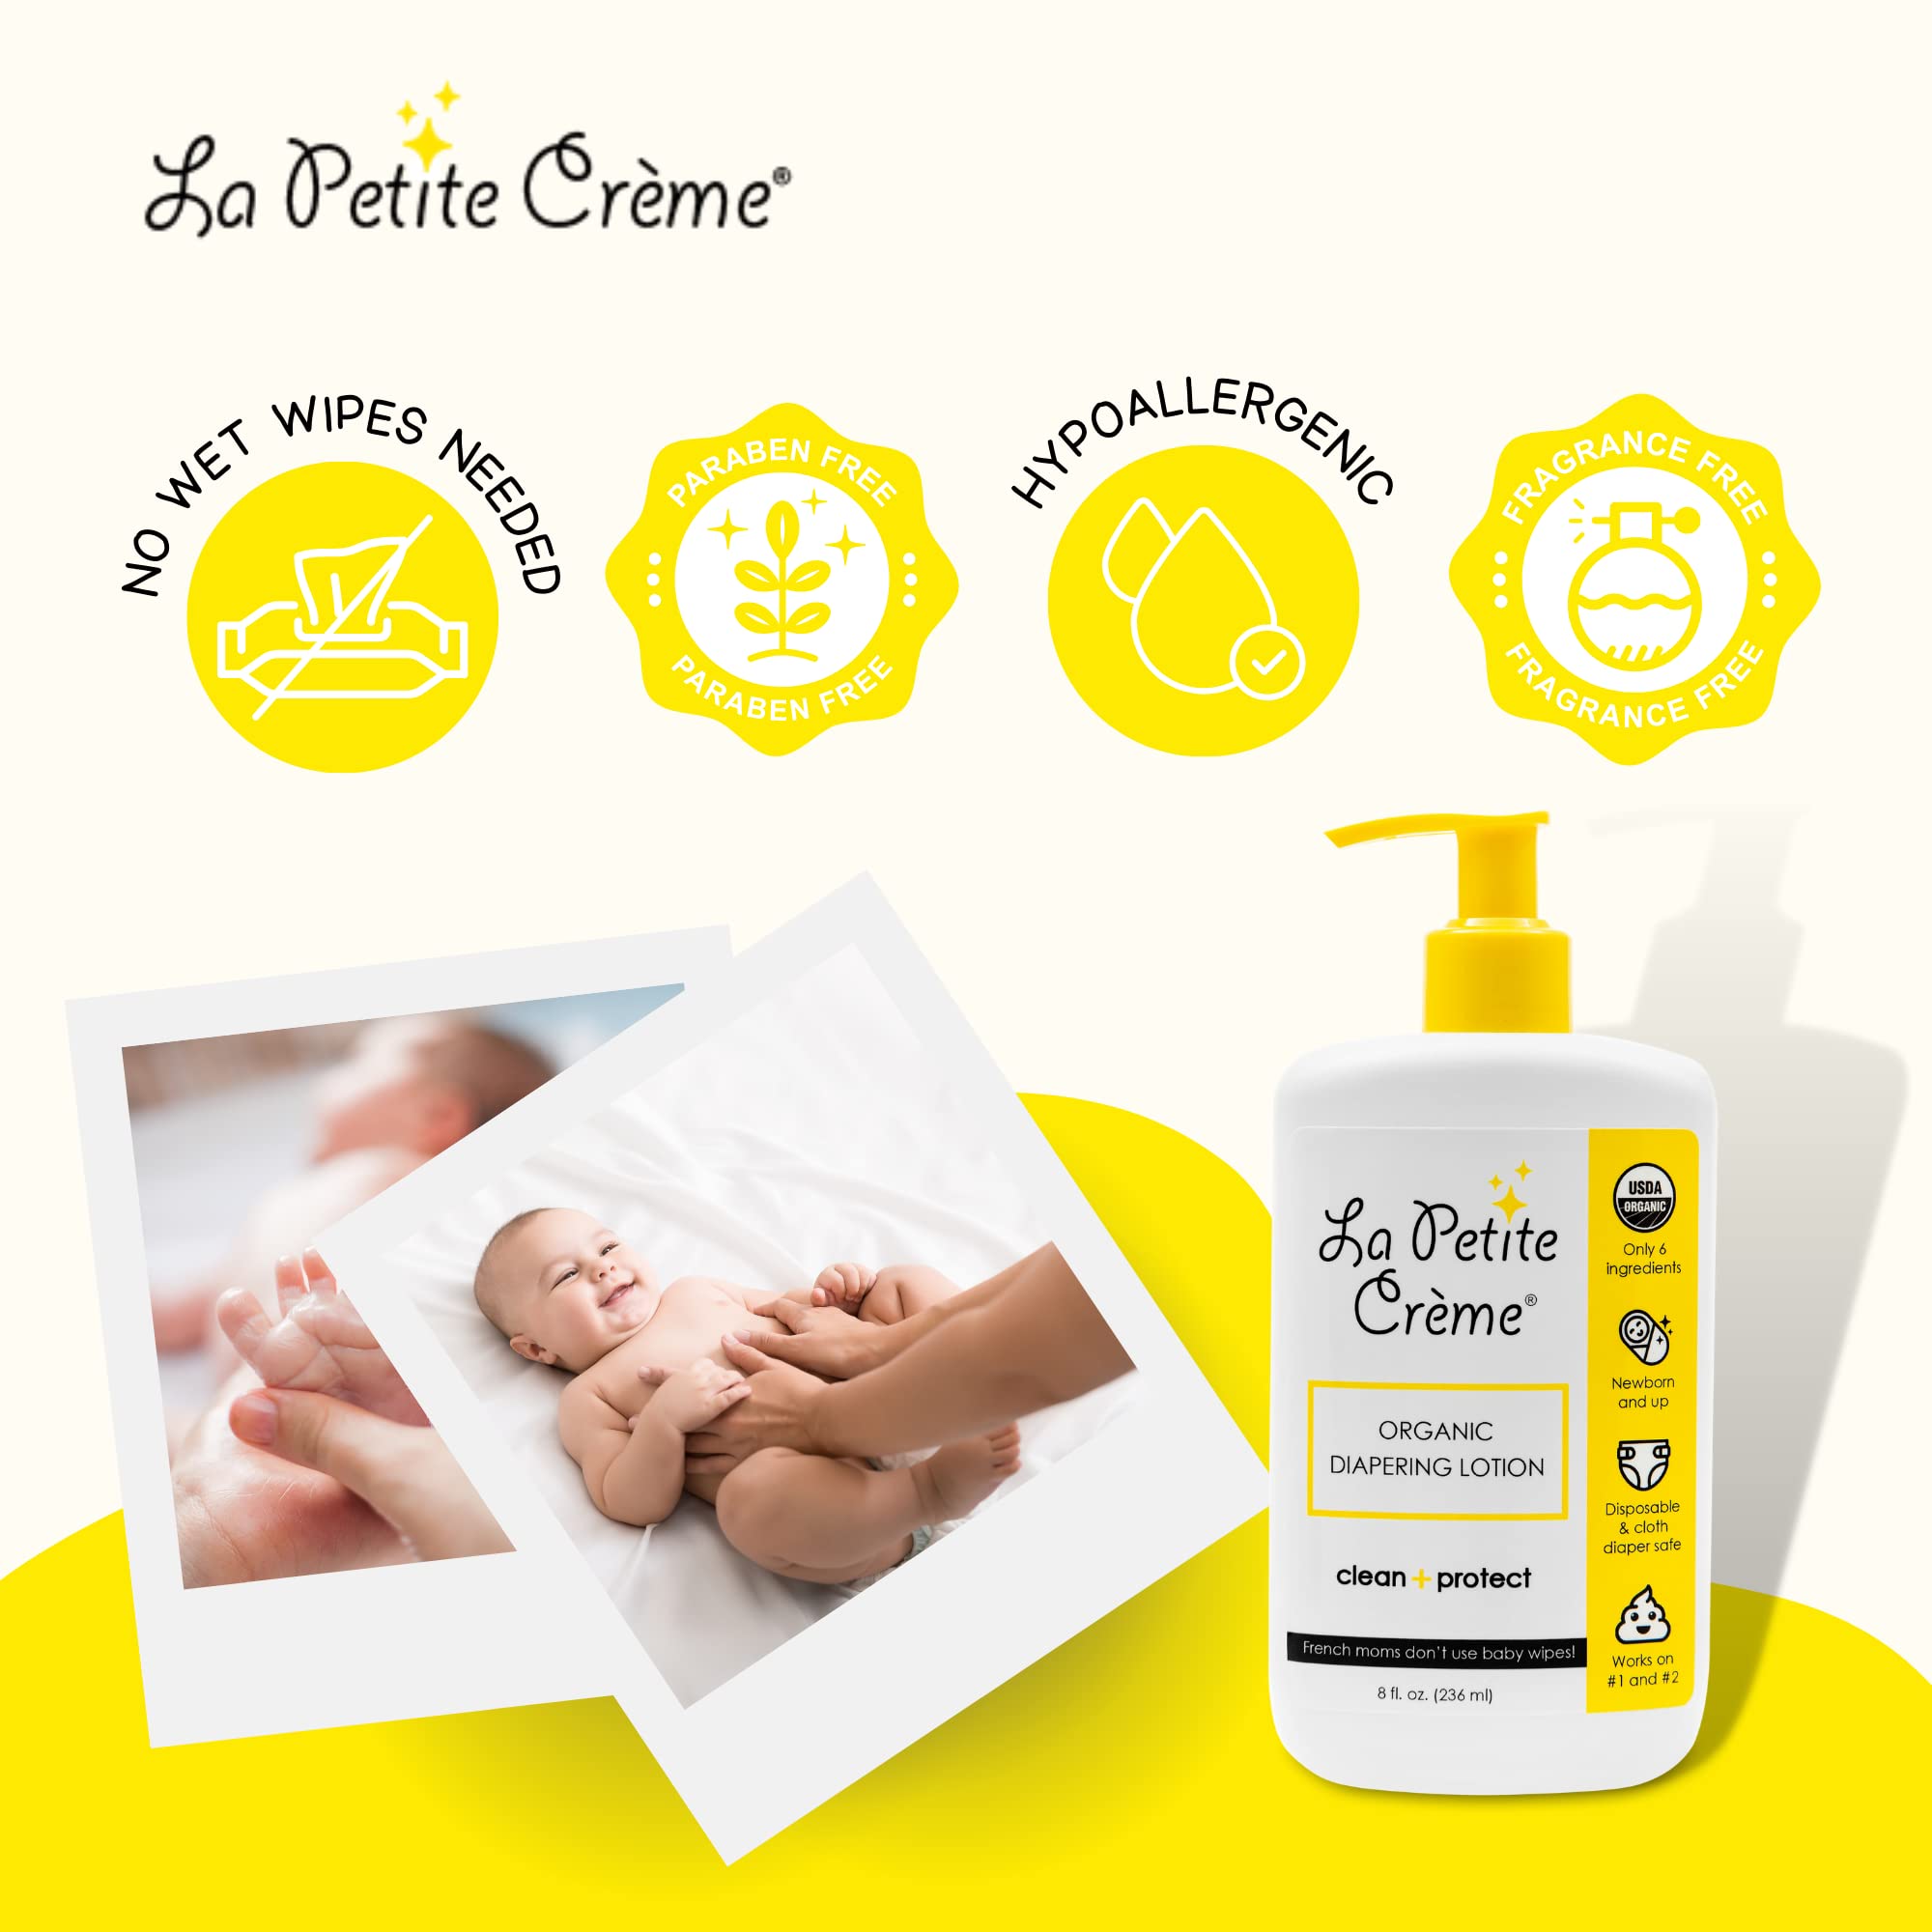 La Petite Creme French All-Natural Diapering Lotion - Diaper Cream Alternative to Baby Wipes - Gentle Moisturizer & Skin Cleanser with USDA Certified Organic Ingredients - Baby Essentials (8 oz)